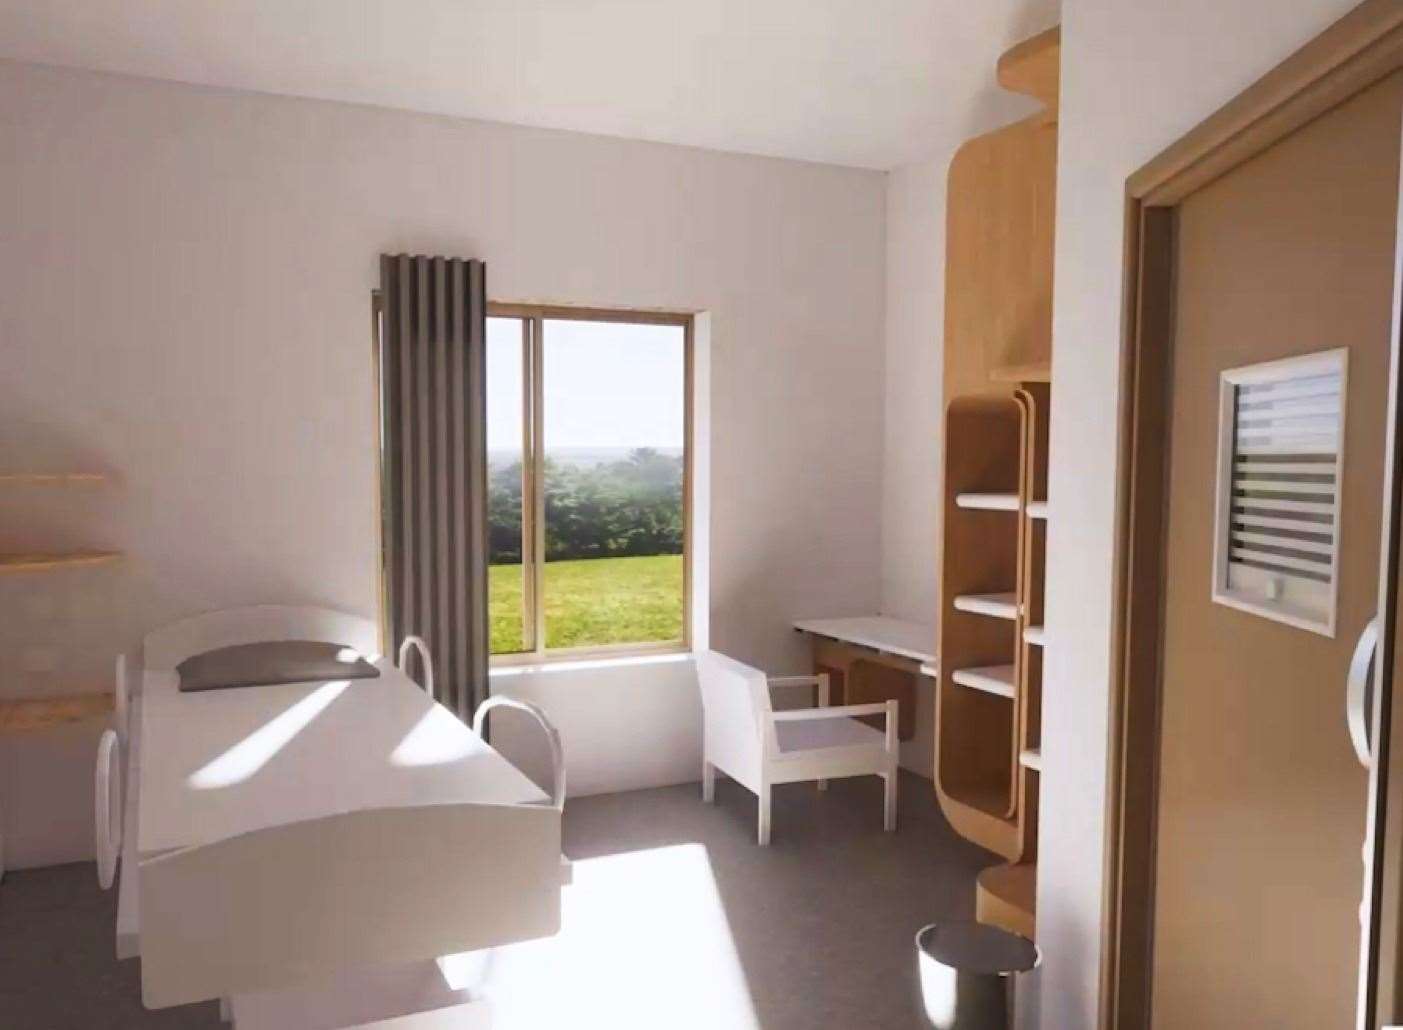 Private rooms will be the main feature of the new Ruby Ward proposed unit on the KMPT site in Maidstone. Picture: KMPT